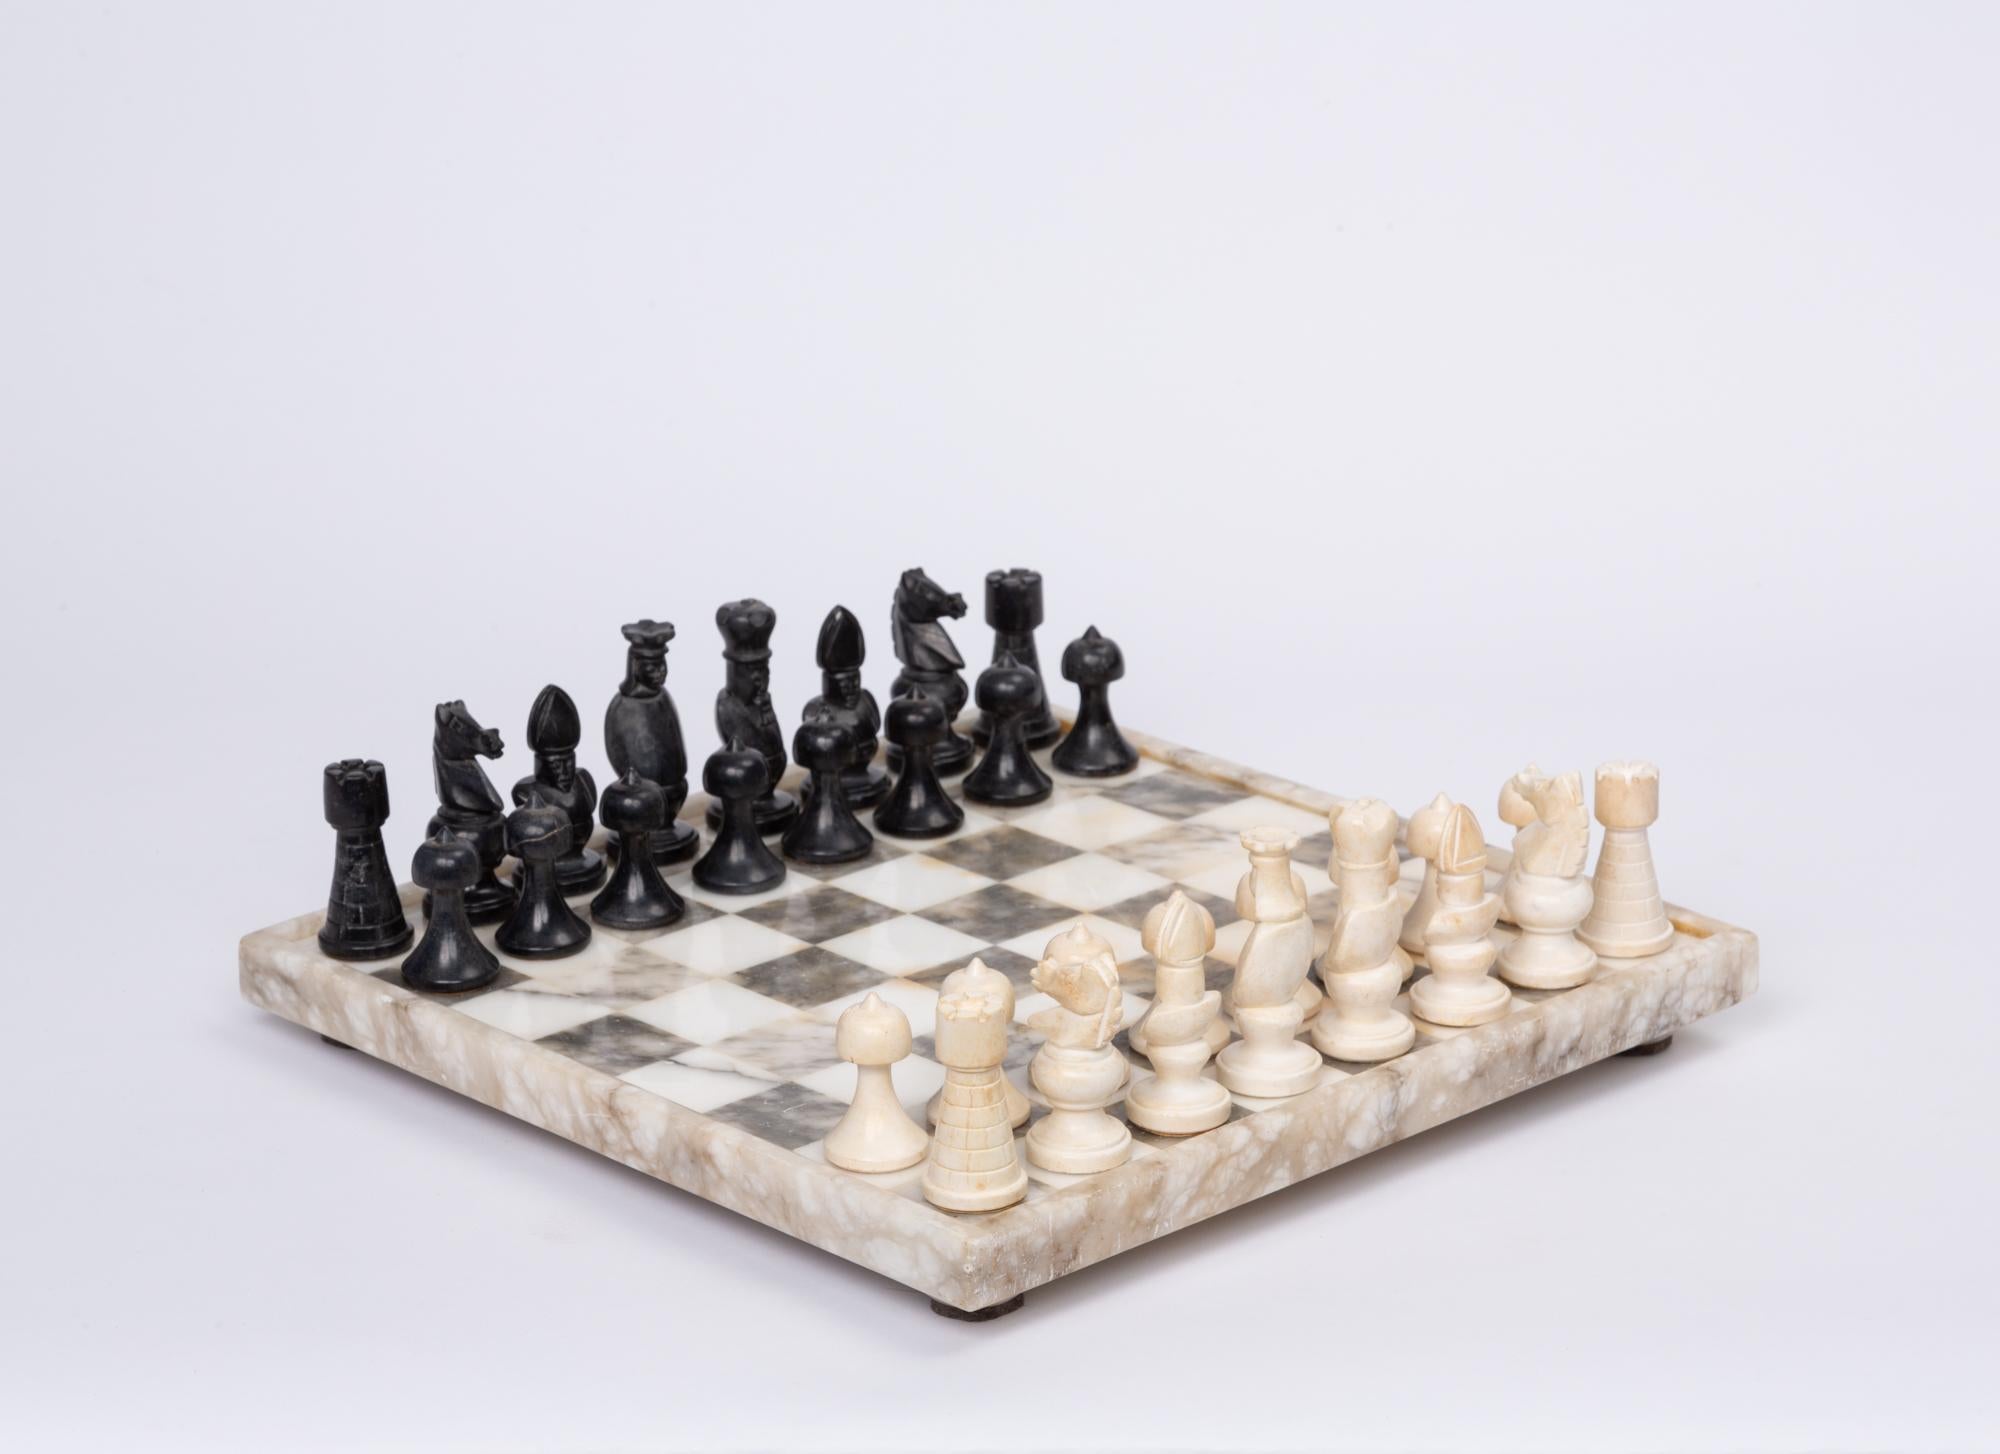 Hand carved marble and bone chess set. This stunning monochrome set features a marble checkerboard inset into a thicker marble frame, which sits atop short marble feet. The intricate chess pieces are hand carved marble and bone, and compliment the